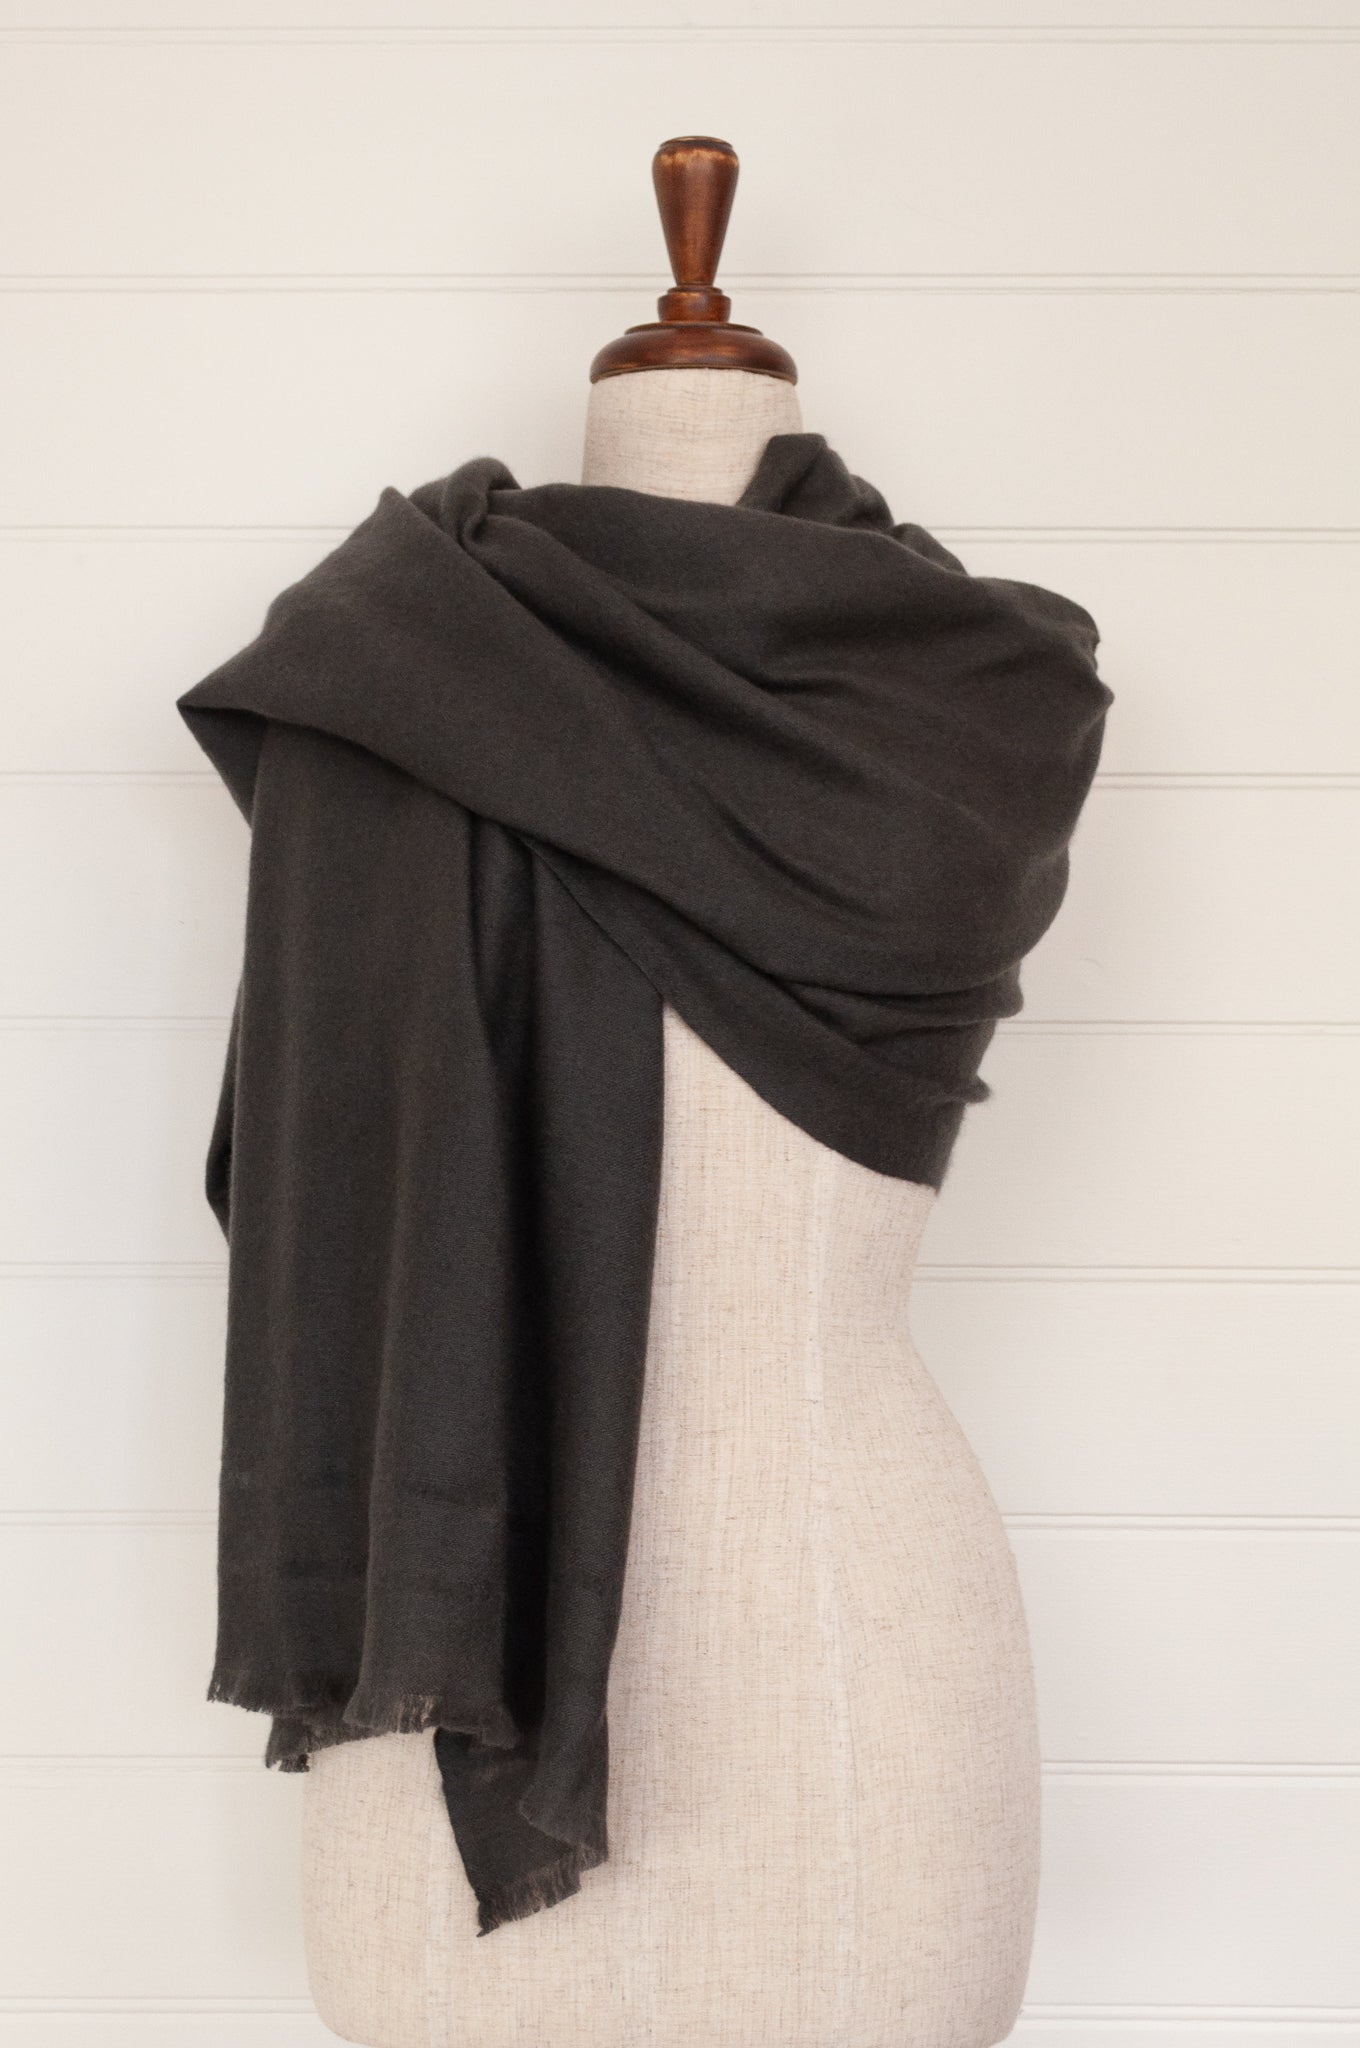 Juniper Hearth woven cashmere scarf featuring fagoting detail and fringed at ends, in charcoal.